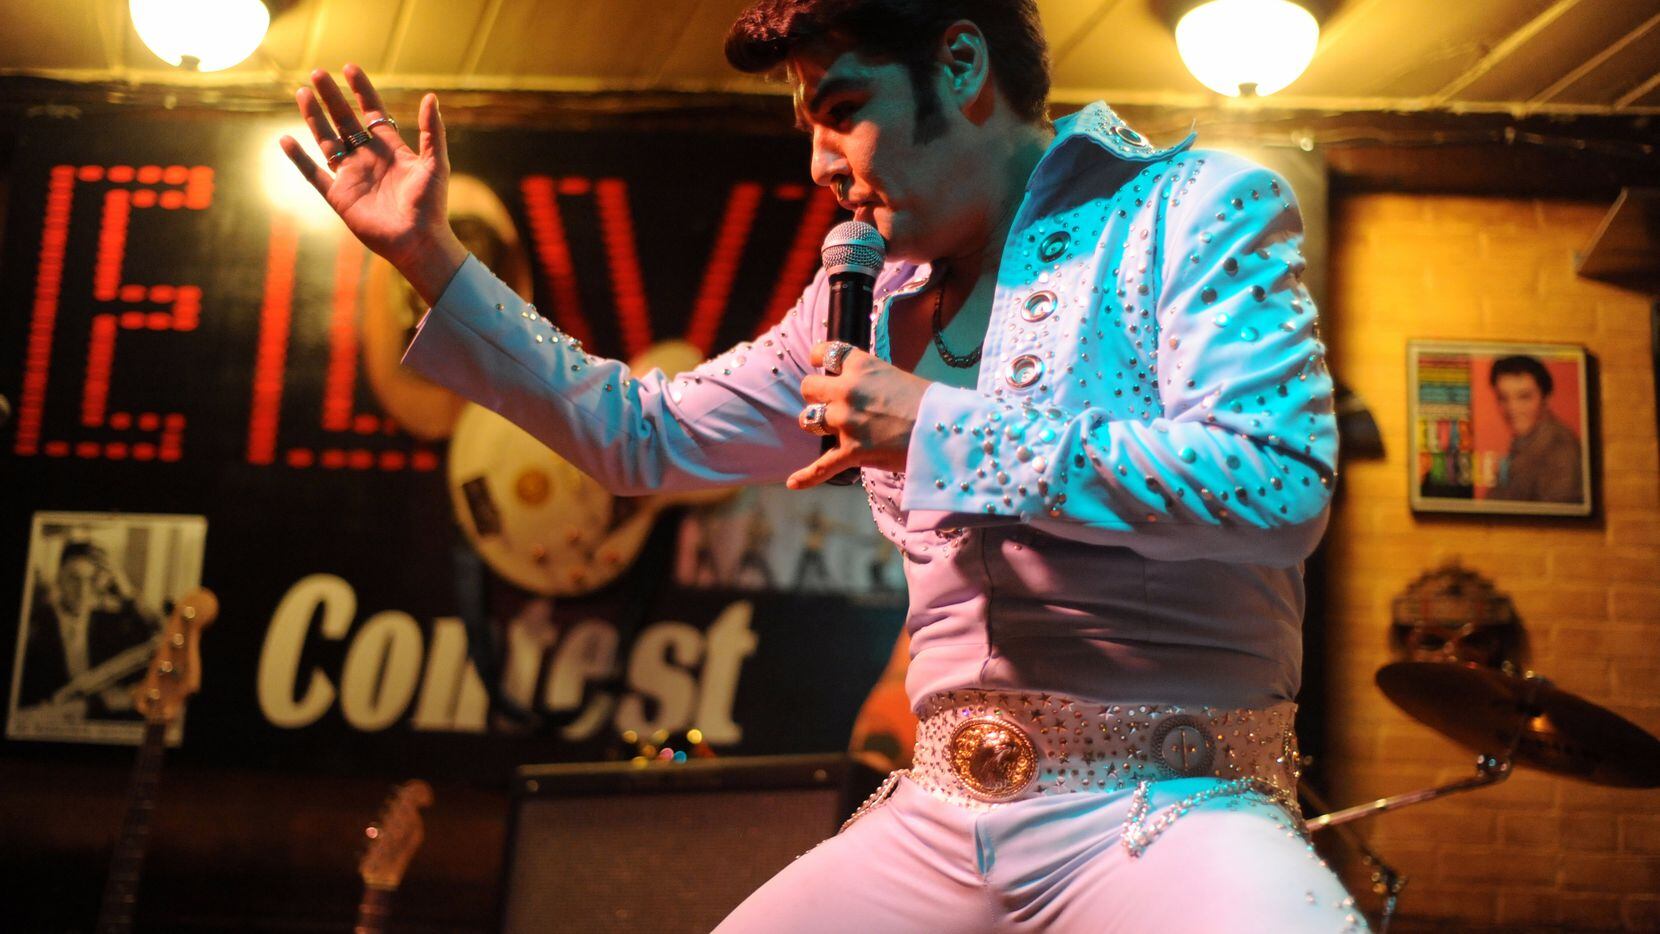 In a 2014 file photo, Pablo wins first place in the Elvis impersonation contest at El...